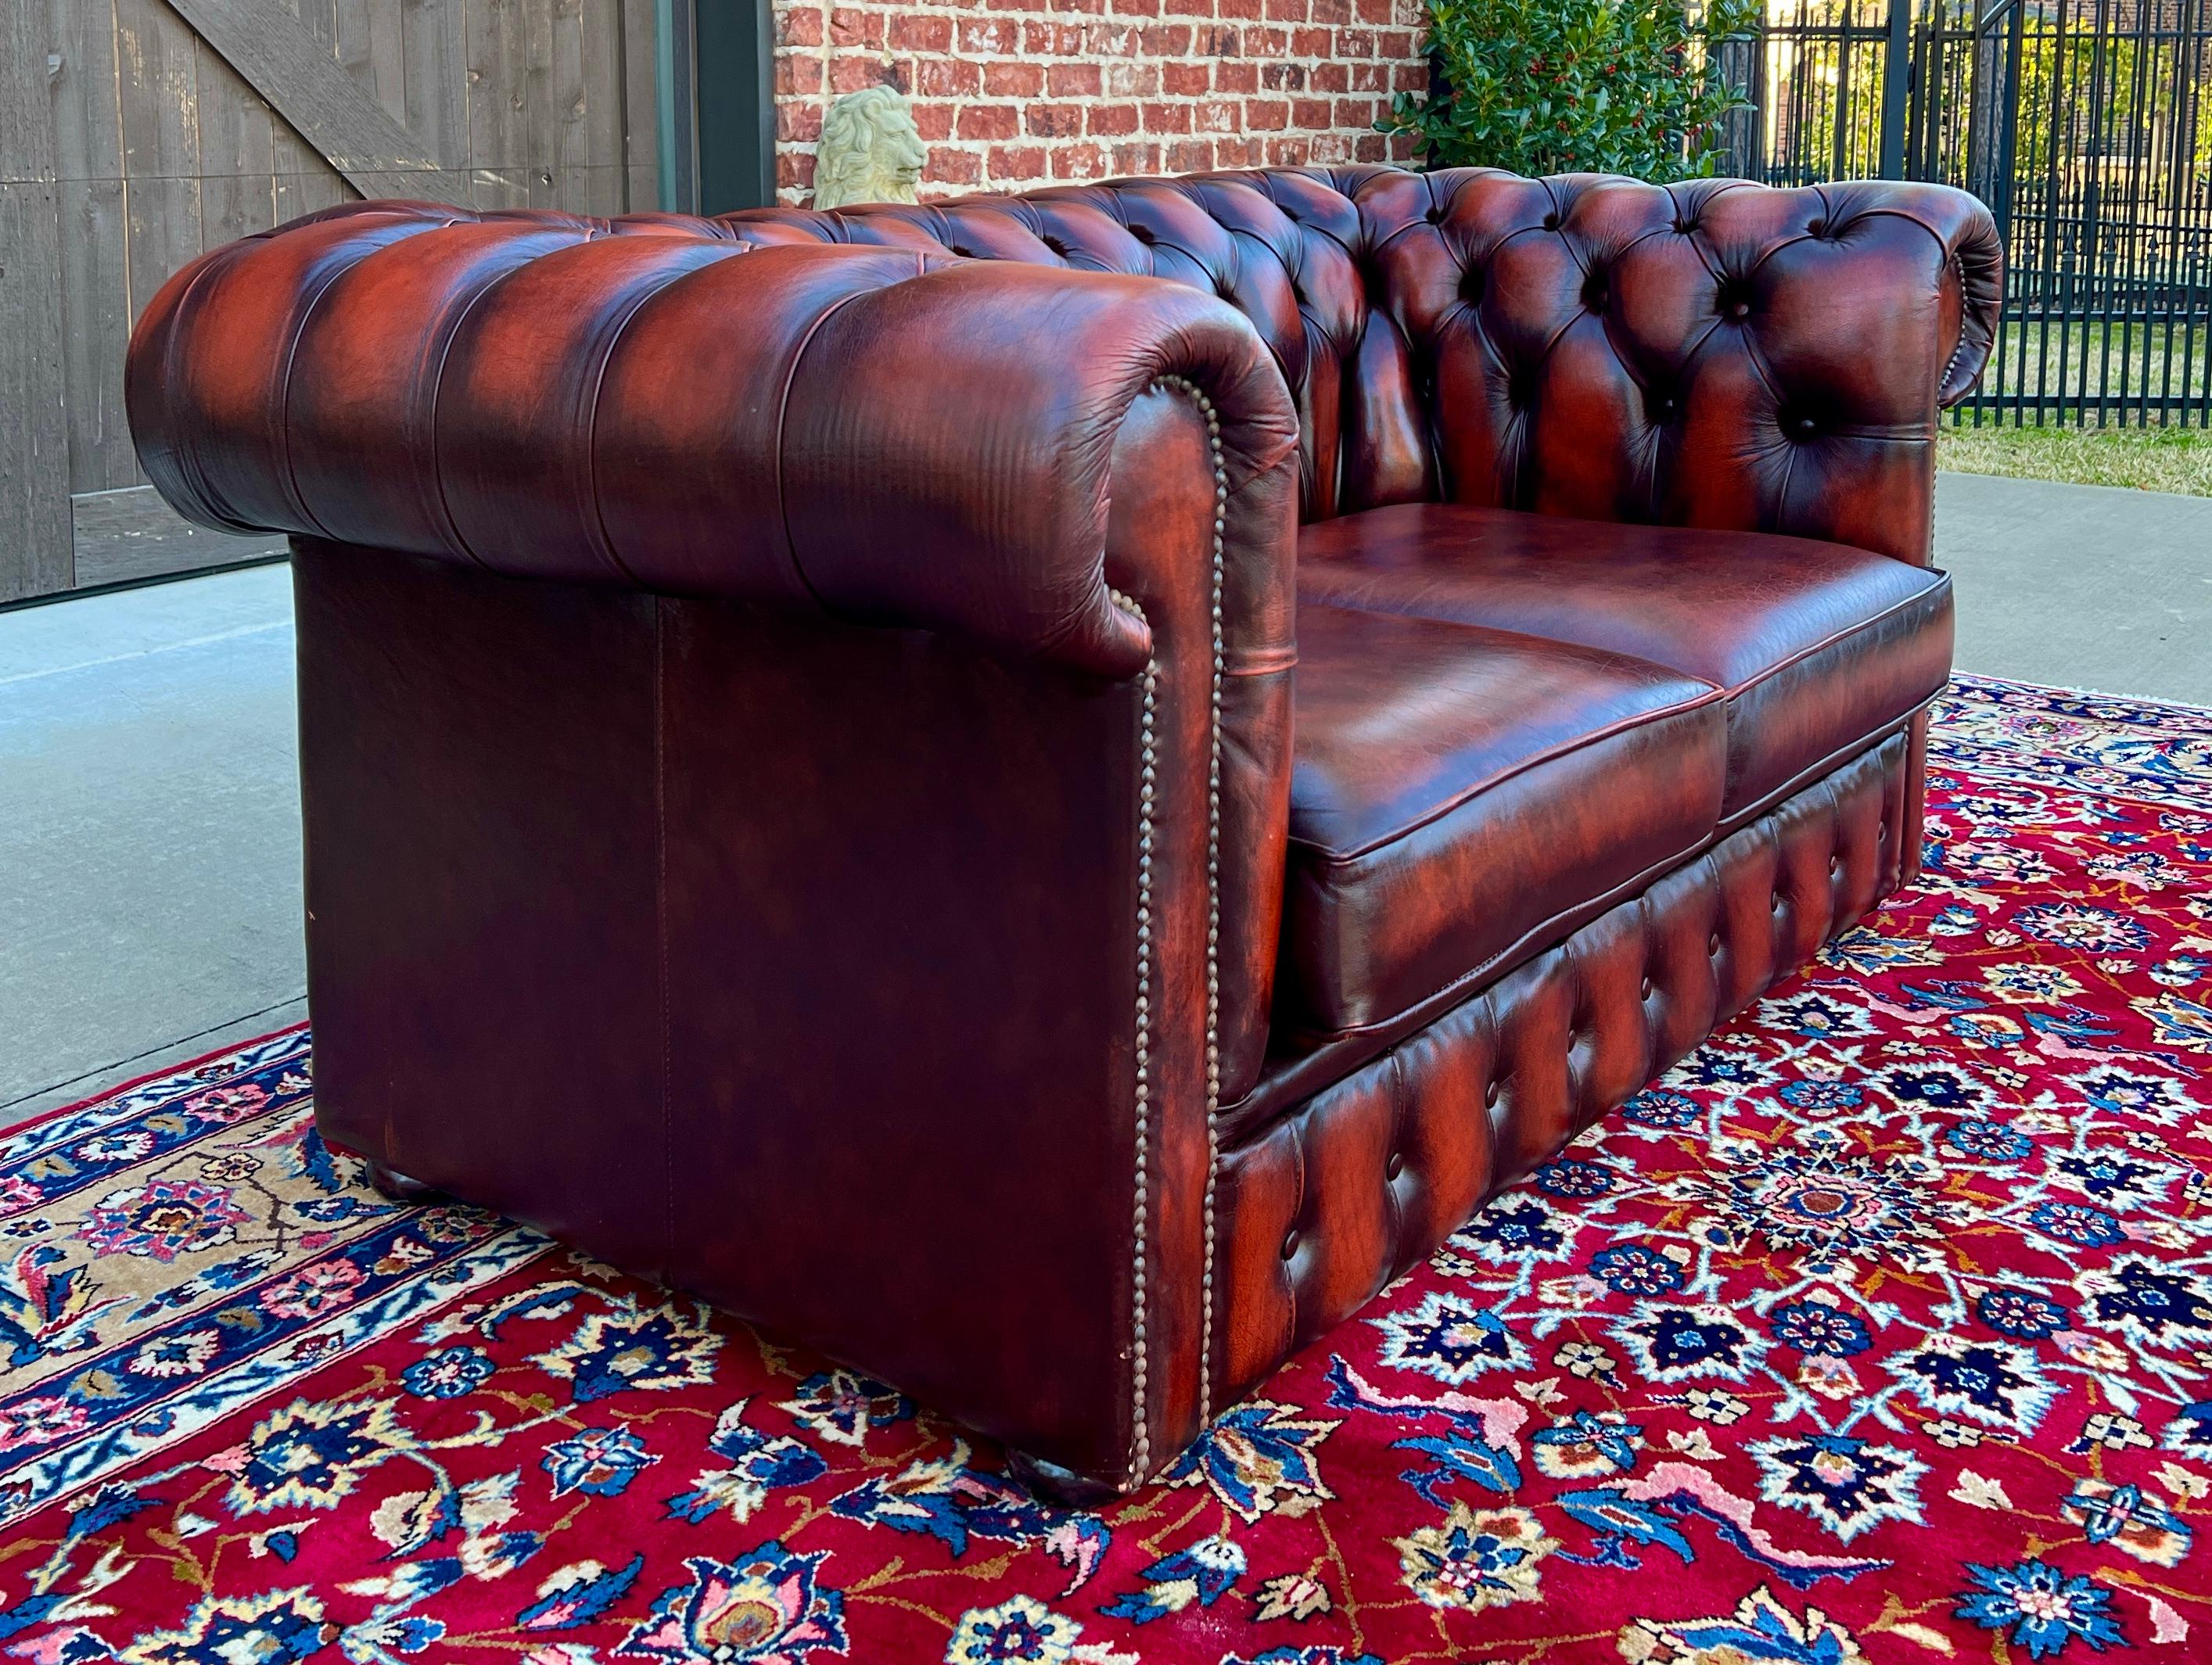 Vintage English Chesterfield Leather Tufted Love Seat Sofa Oxblood Red #2 7